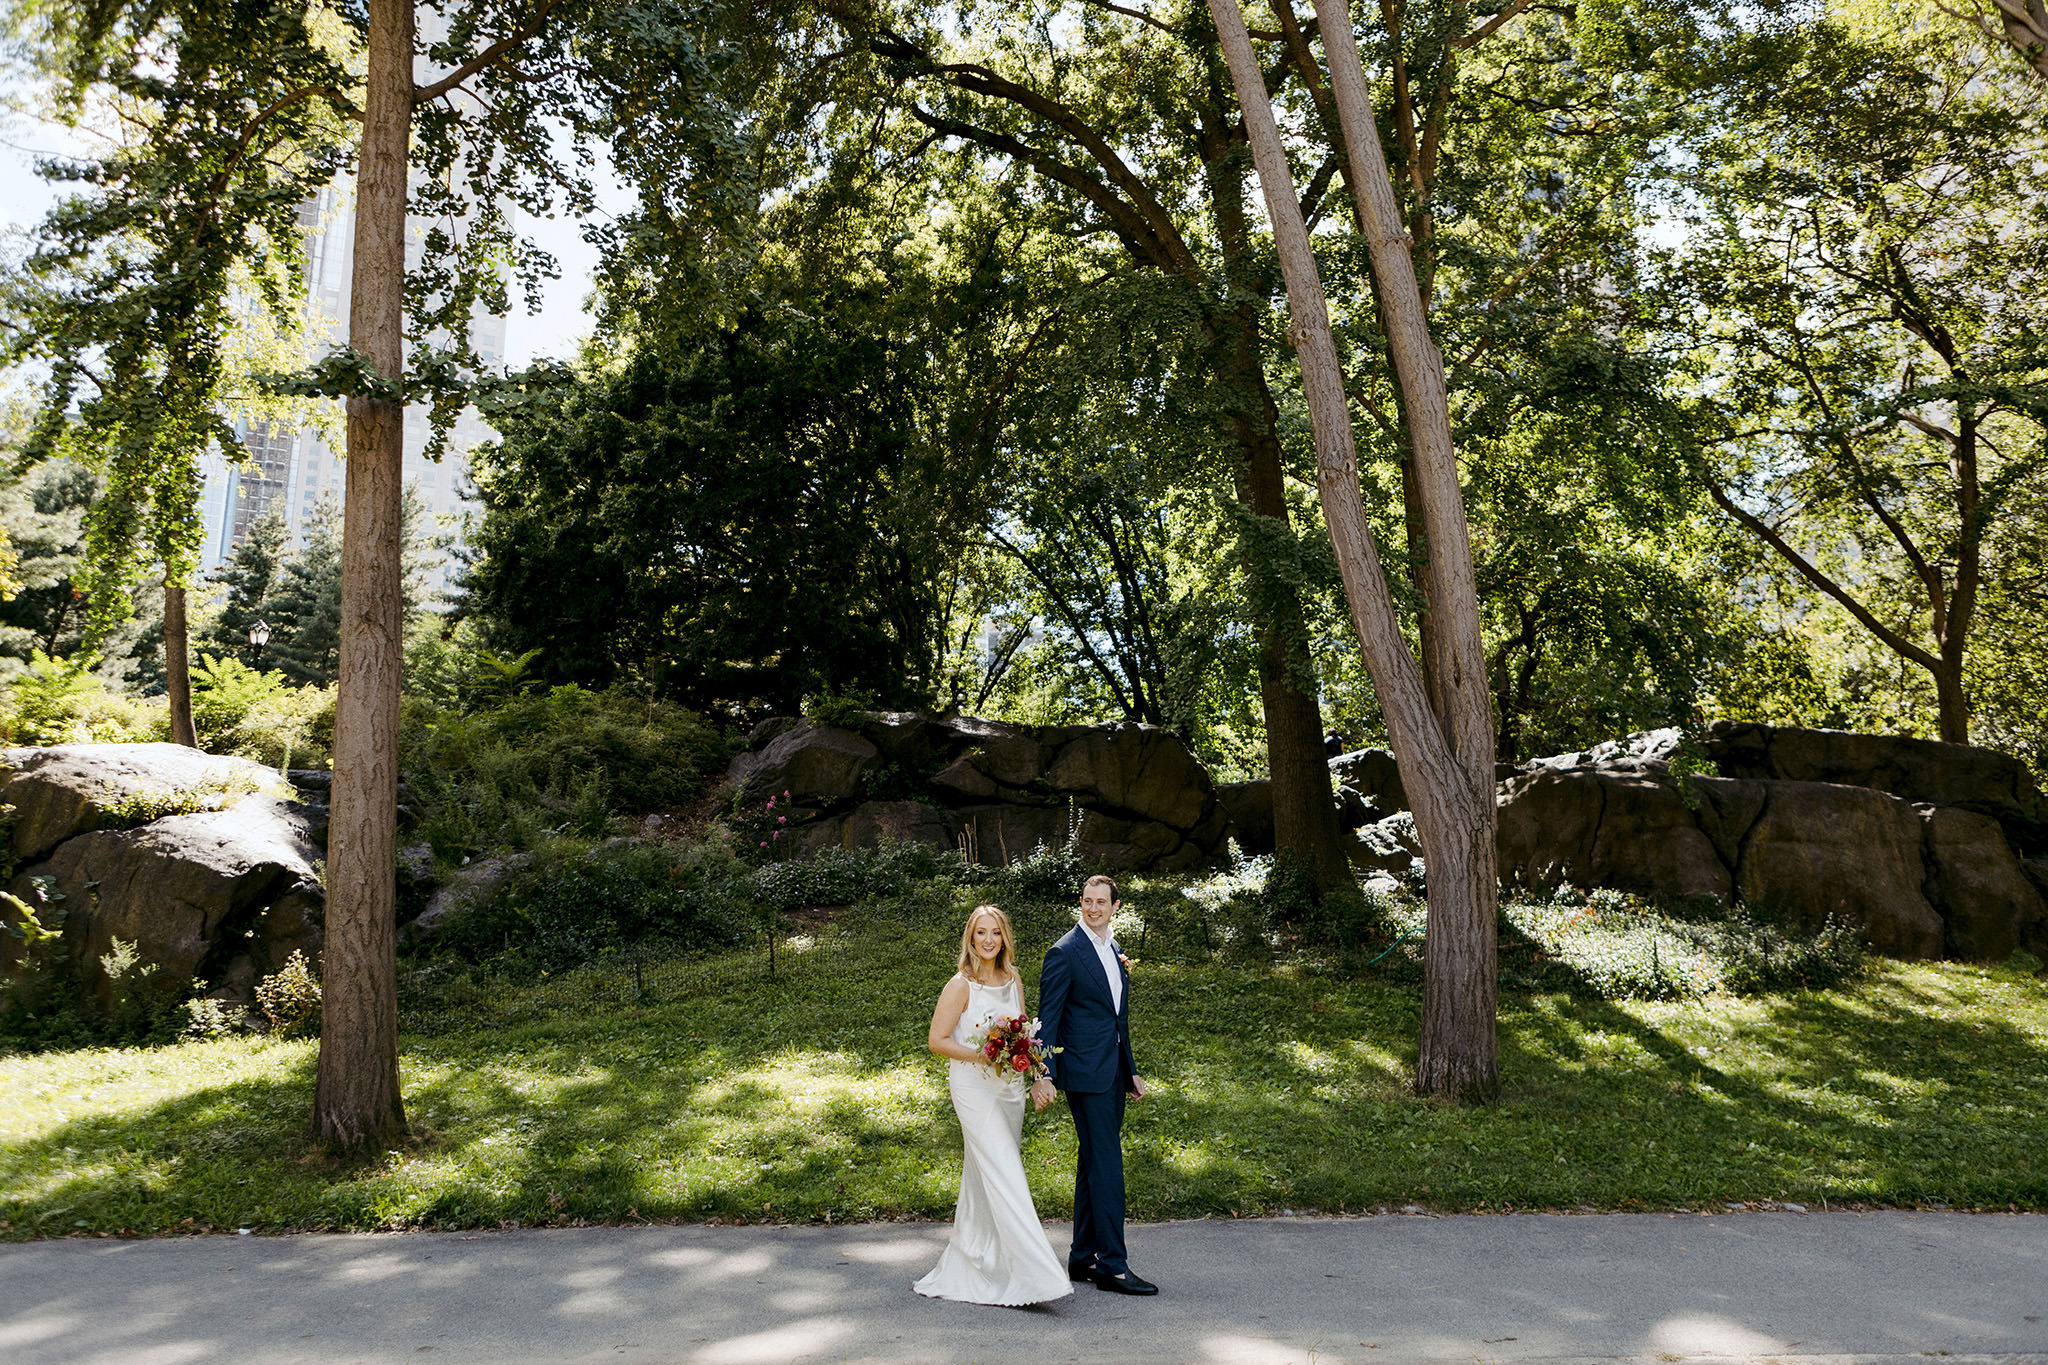 Man and wife walking through Central Park on their wedding day